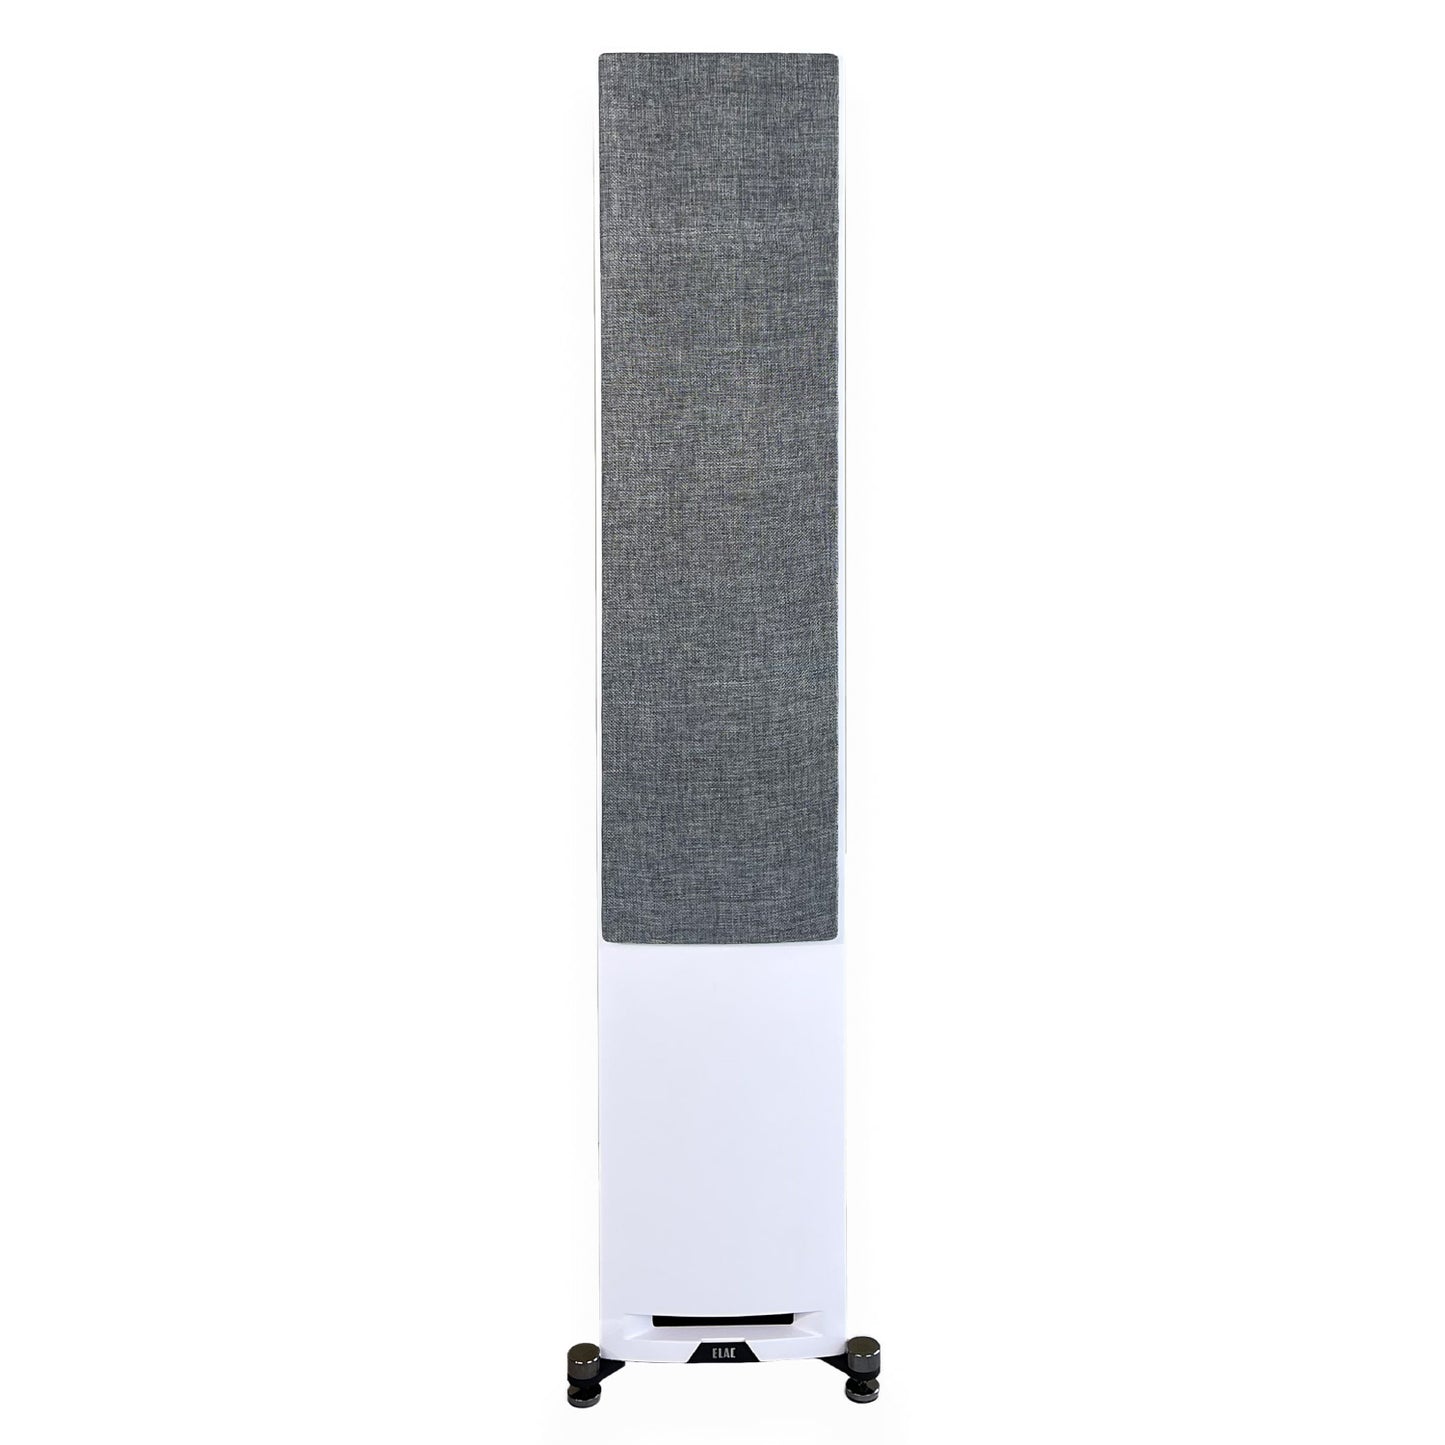 ELAC Debut Reference DFR-52 Floorstanding Loudspeakers White with grill cover